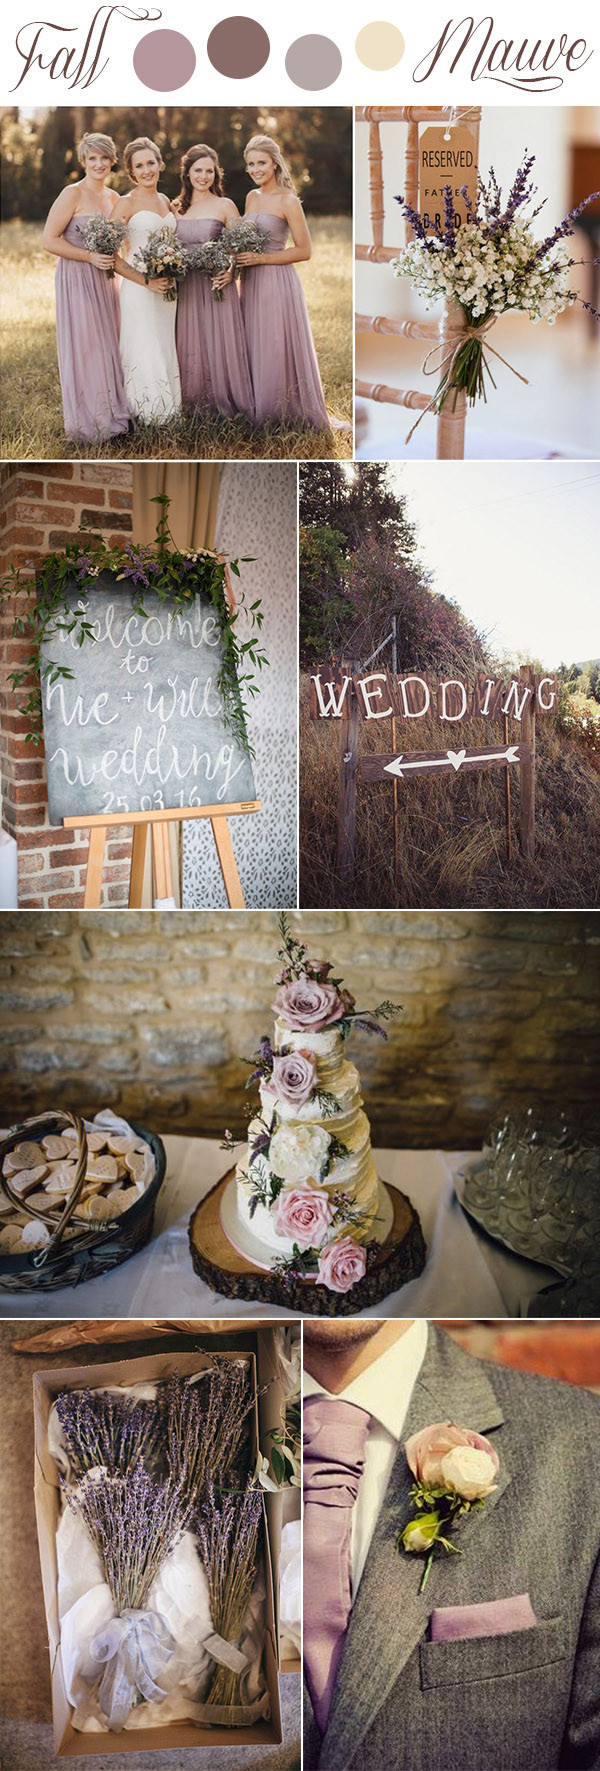 Country Wedding Color Schemes
 7 Gorgeous Rustic Romantic and Elegant Wedding Ideas